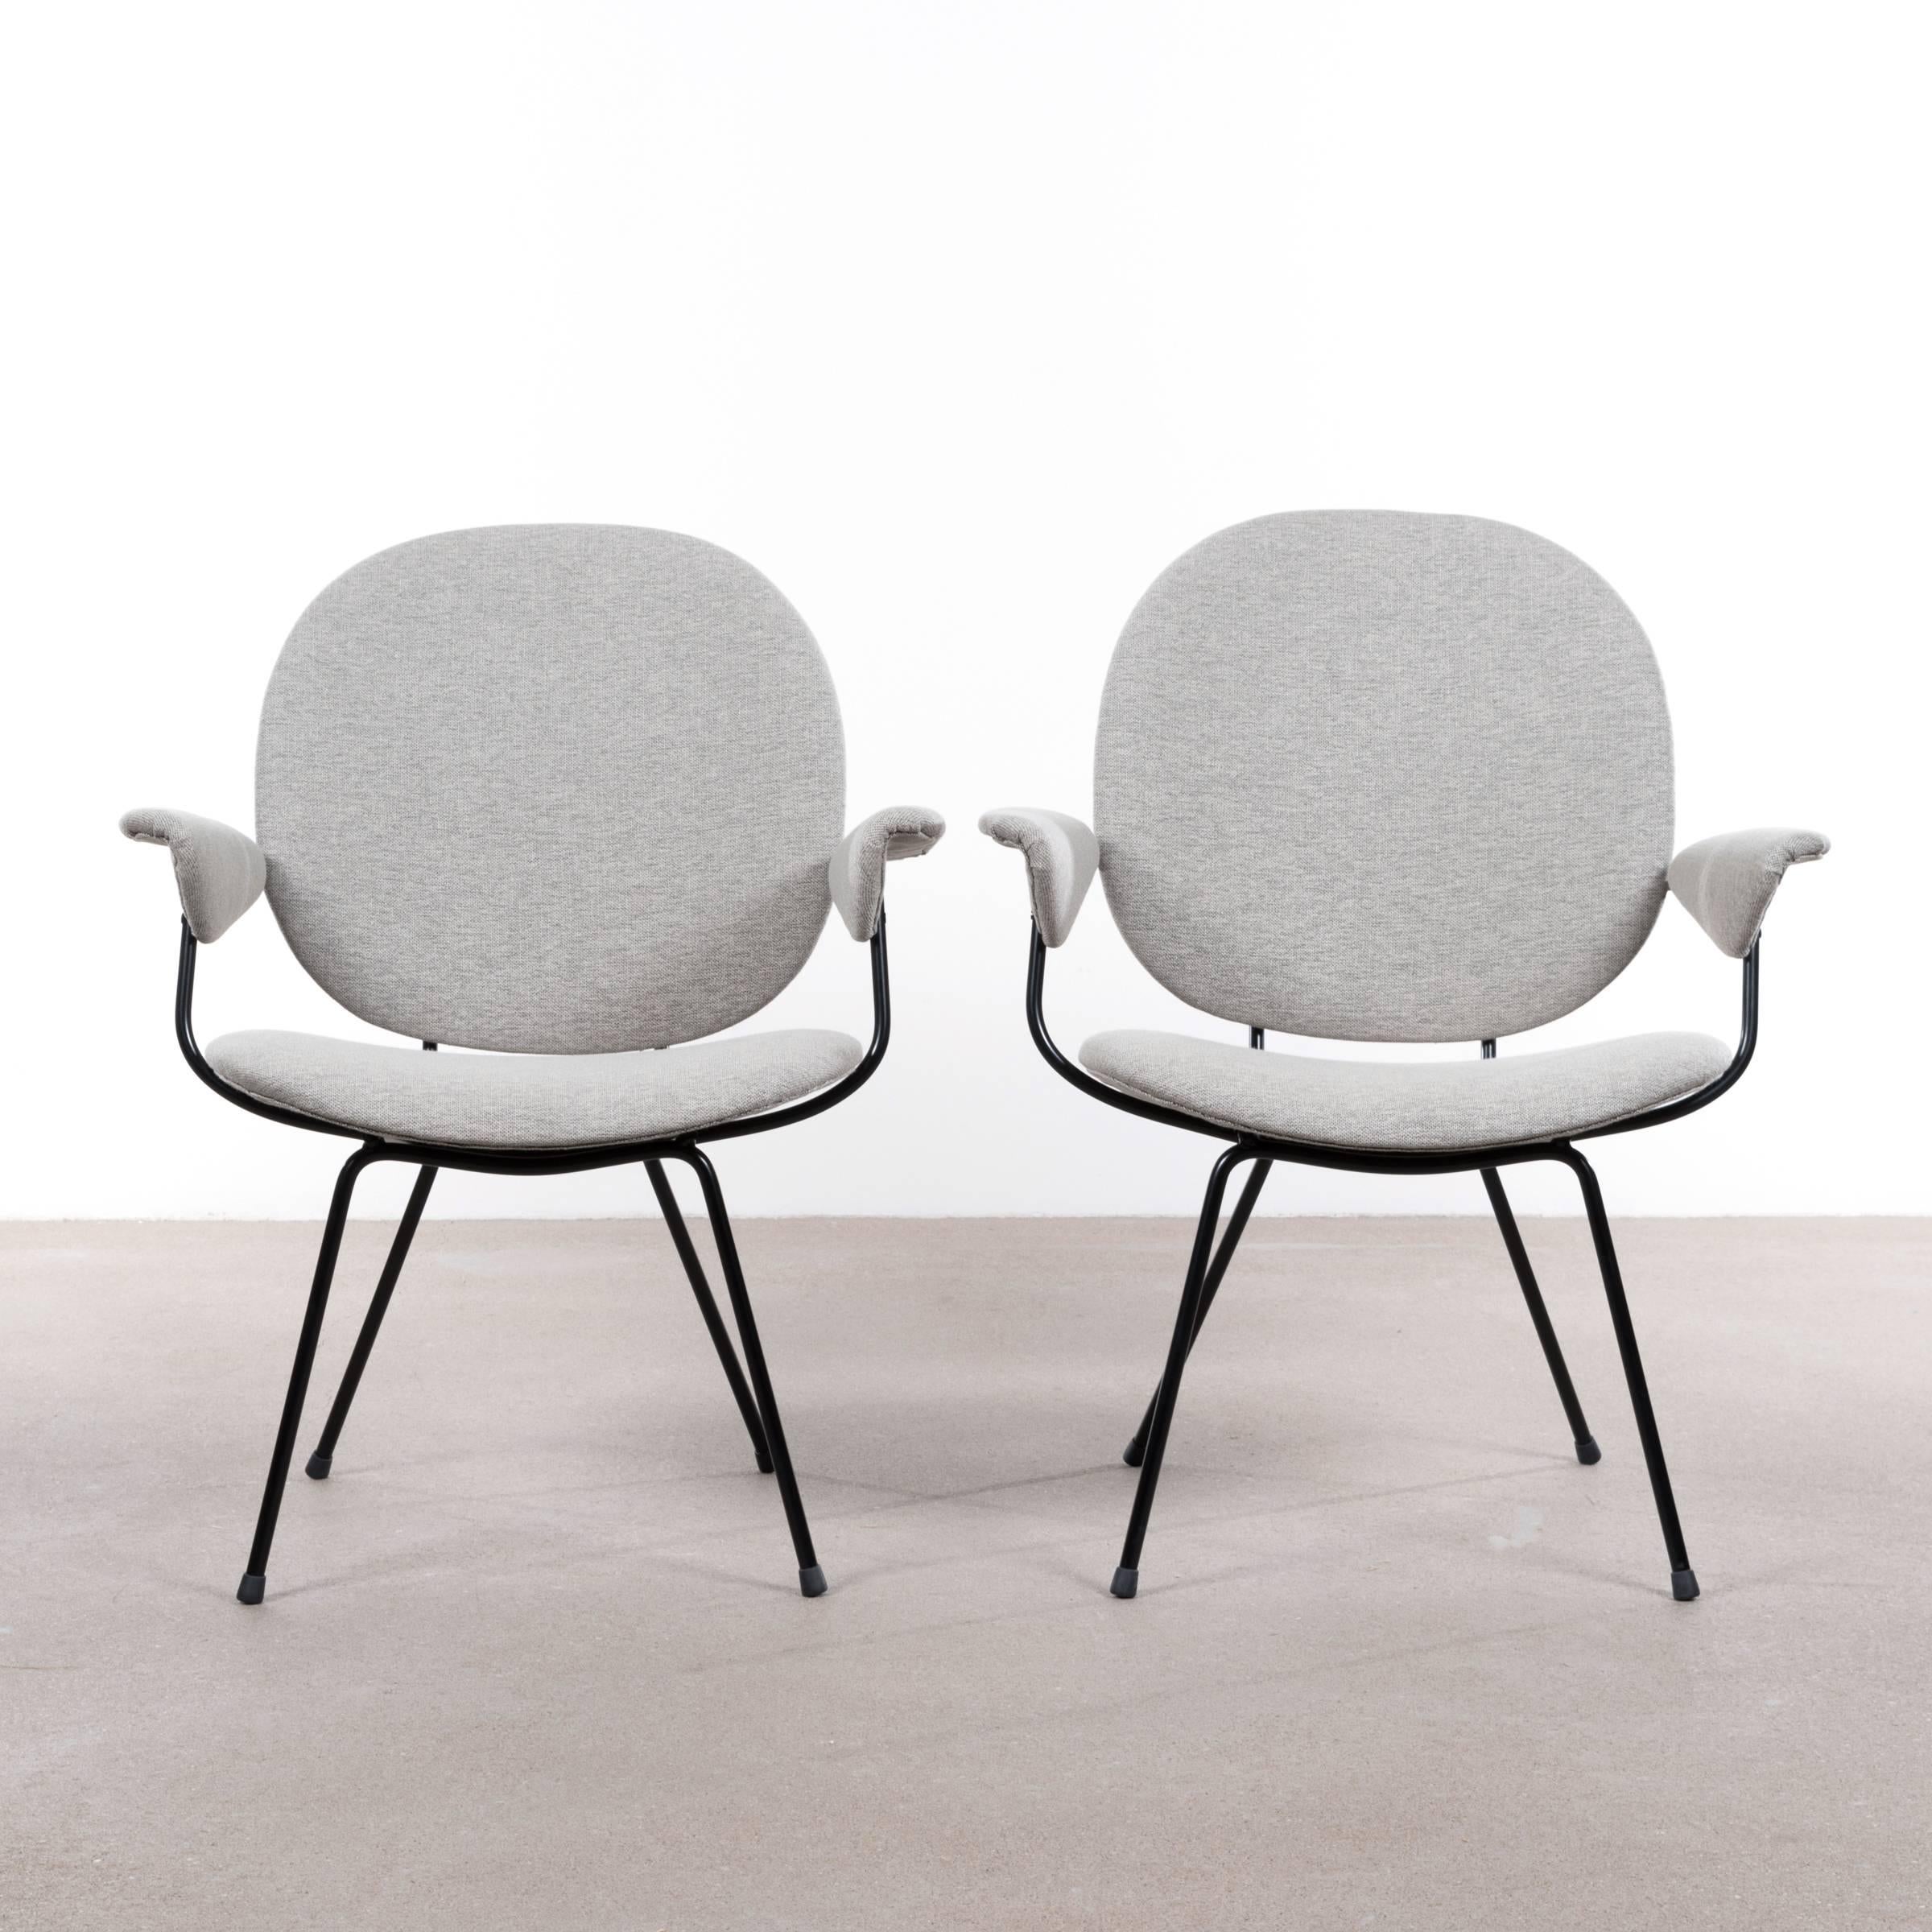 Beautiful, comfortable and elegant easy chairs designed by WH Gispen. Excellent condition with new light grey De Ploeg upholstery and black powder coated frames.